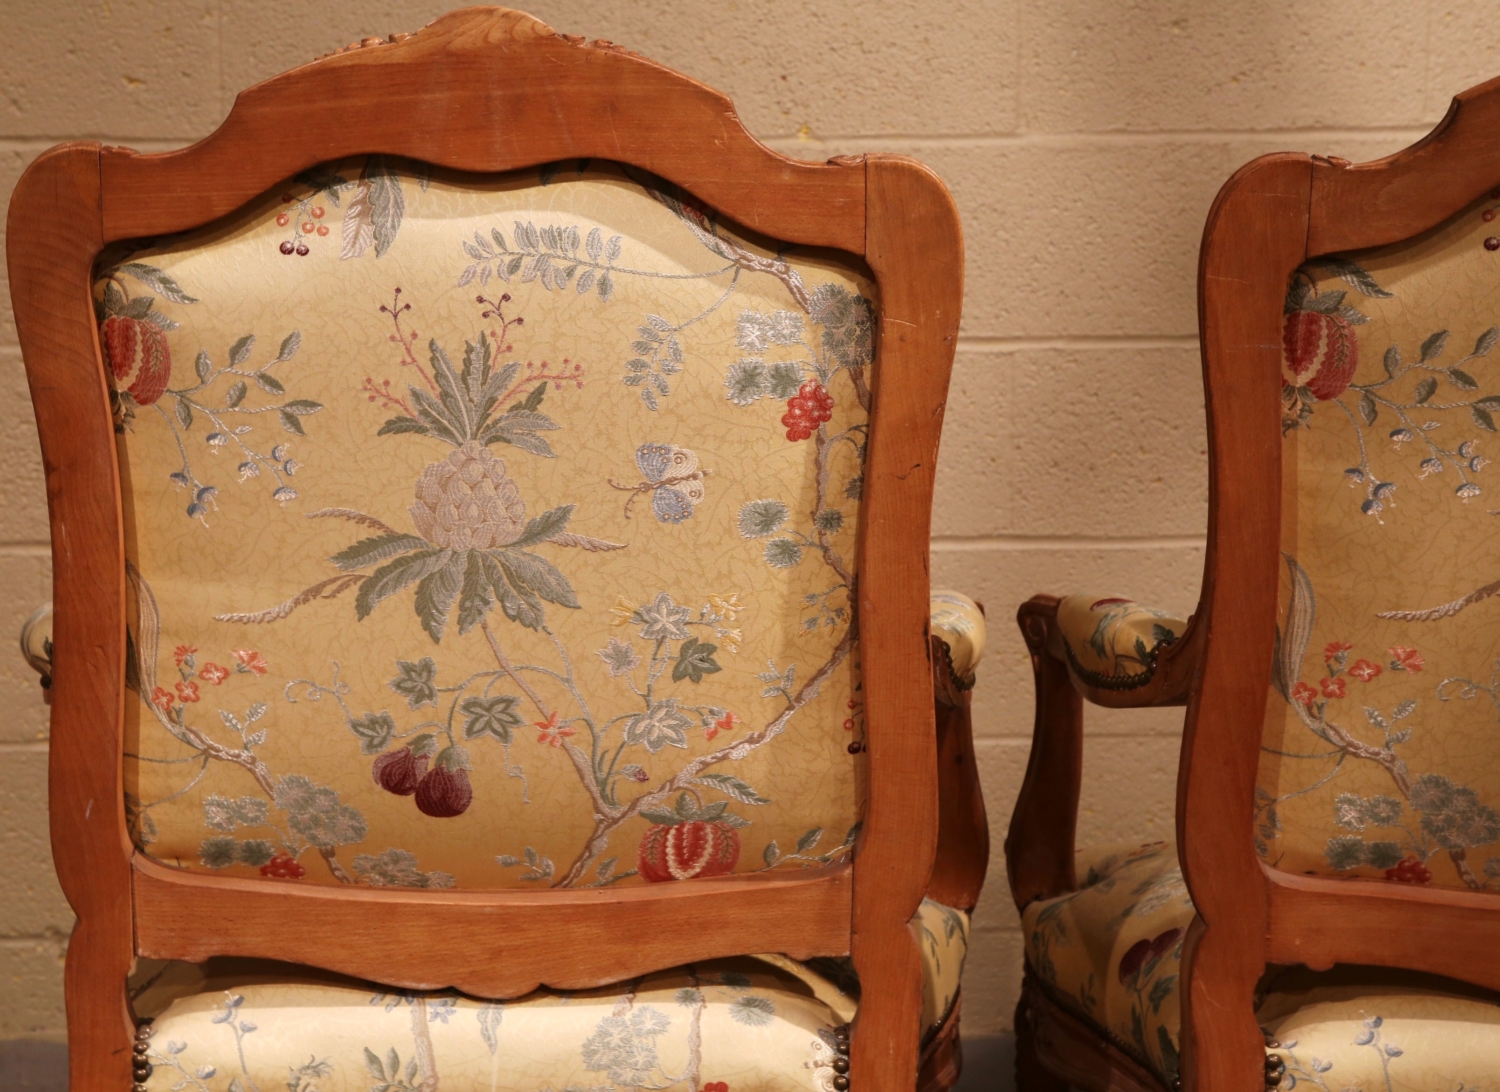 New Scalamandre Upholstery - Circa 1910 Louis XV-Style Carved